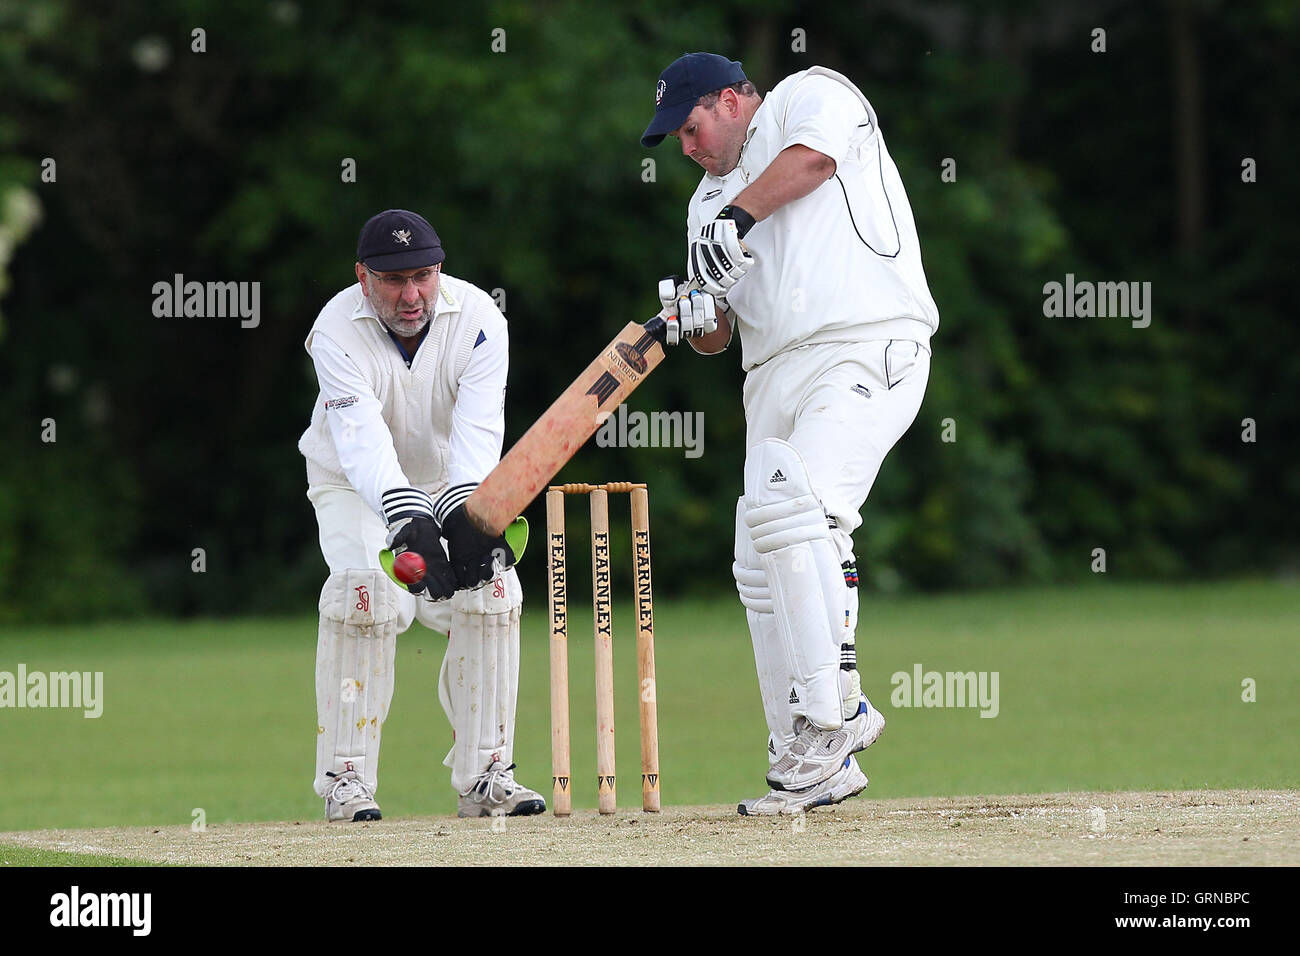 Havering-atte-Bower CC 3rd XI (batting) vs Navestock Ardleigh Green CC 2nd XI - Essex Cricket League at Hall Lane - 24/05/14 Stock Photo